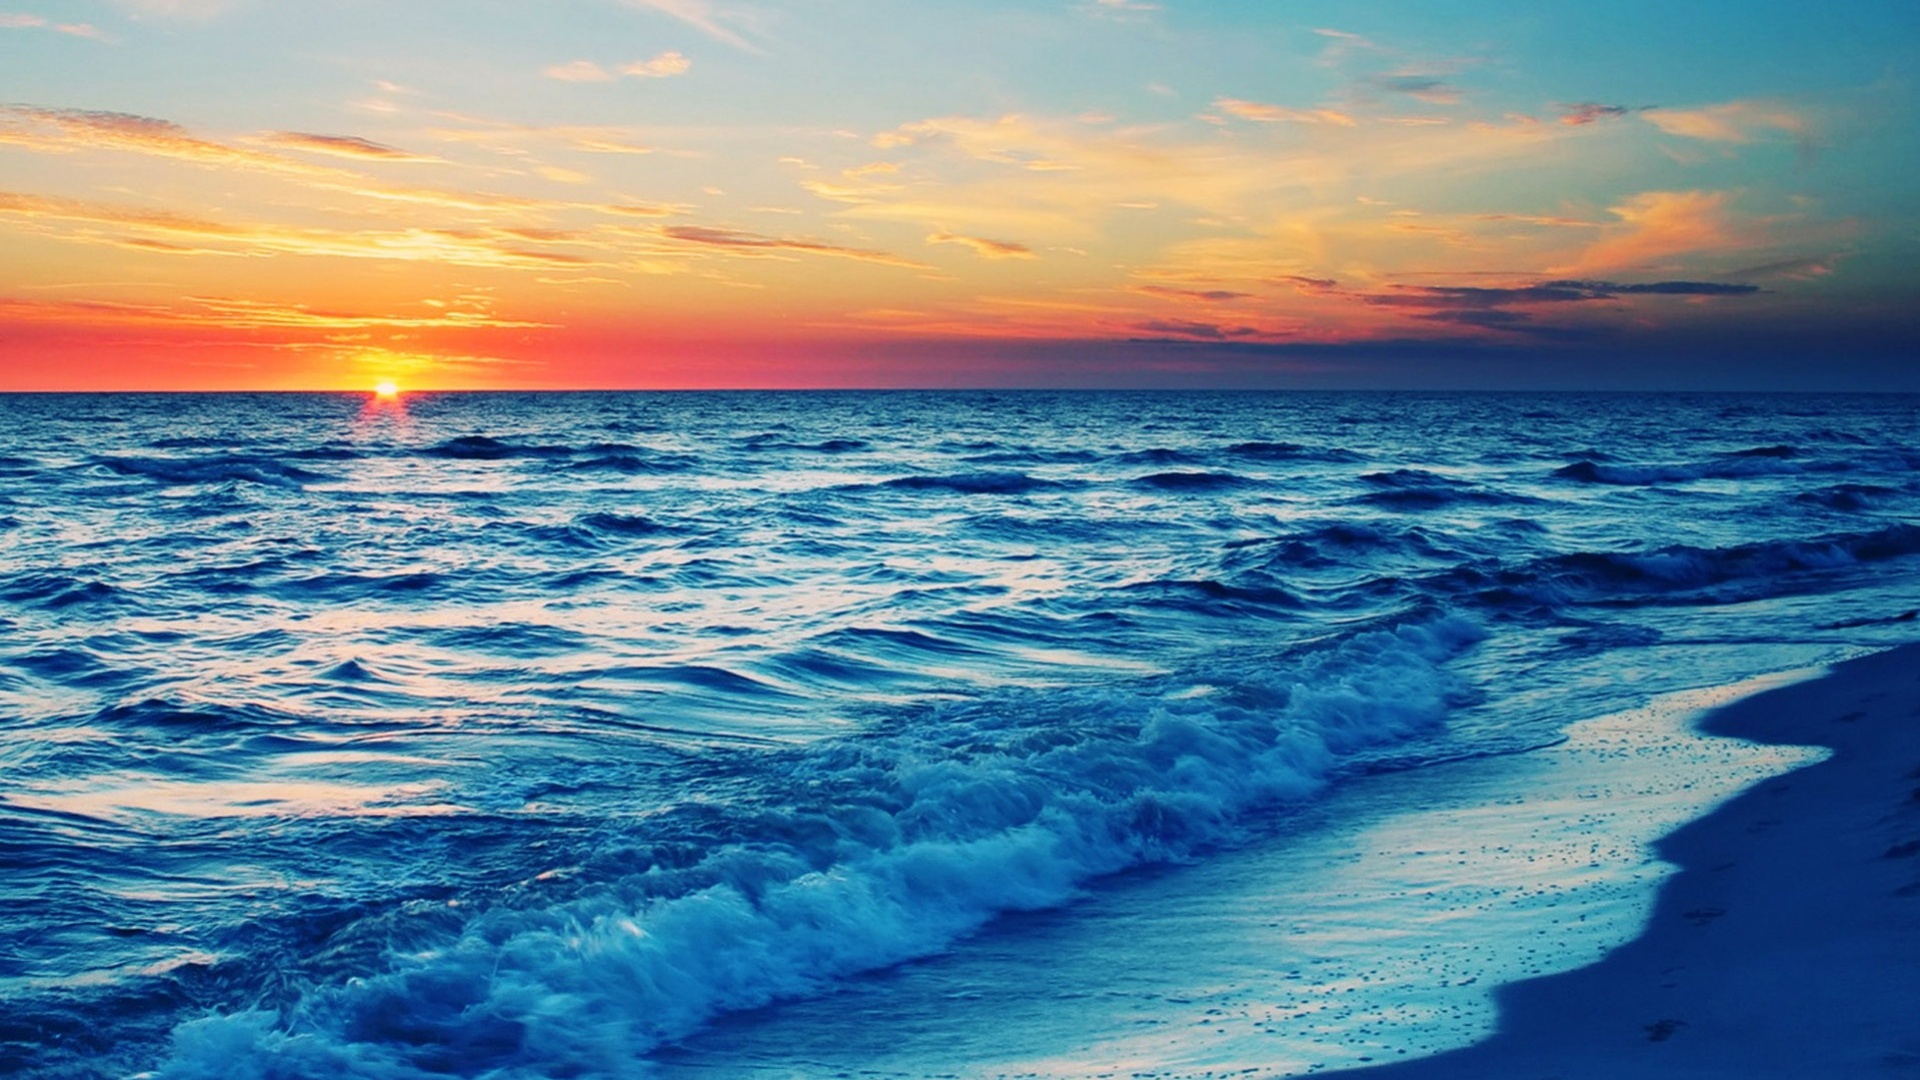 Waves and sunset 4K wallpaper download